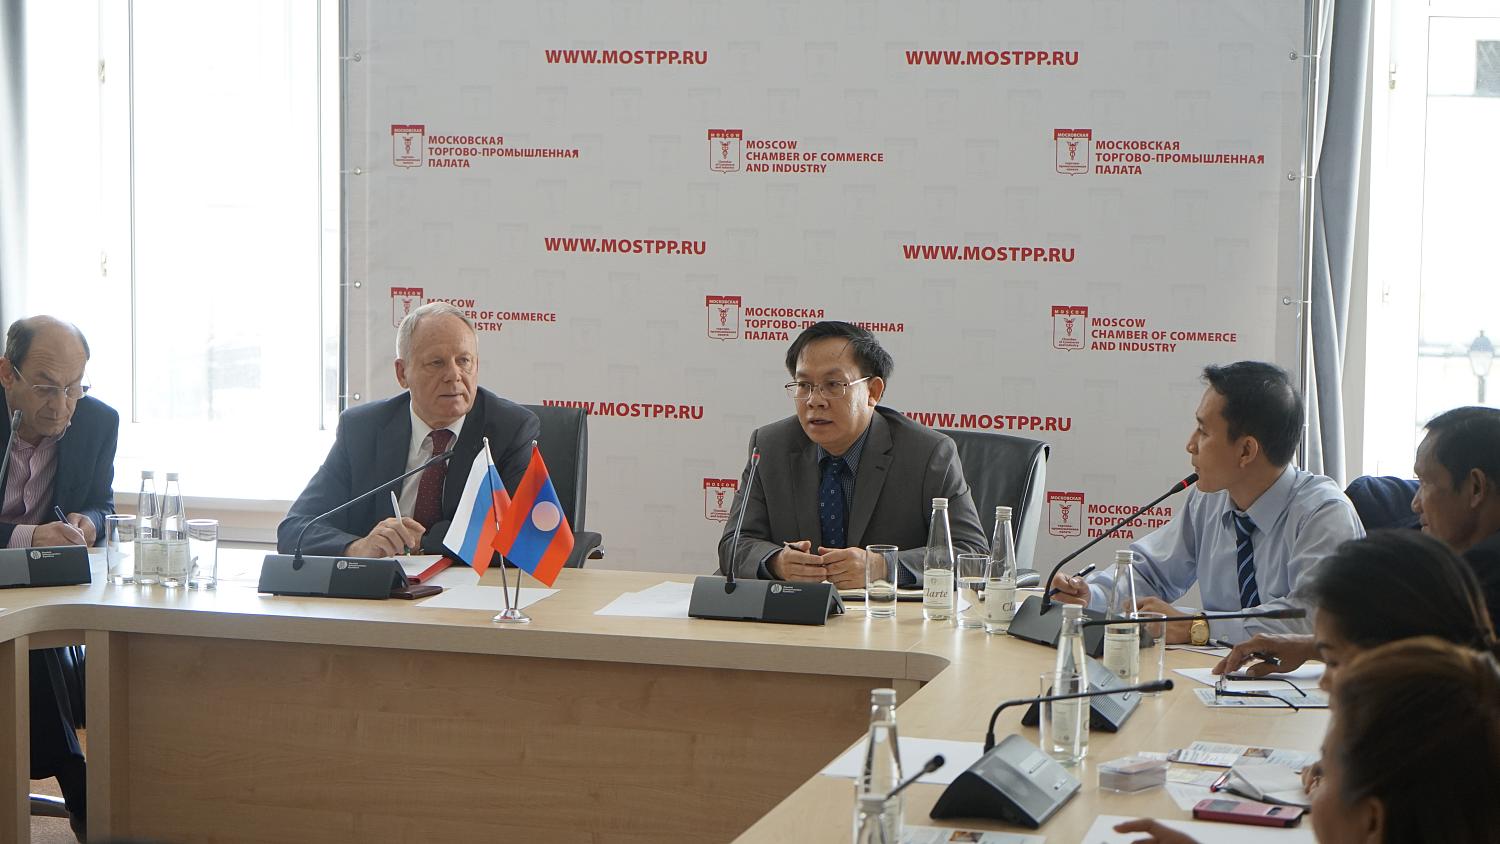 A delegation from Vientiane visited the Moscow Chamber of Commerce and Industry